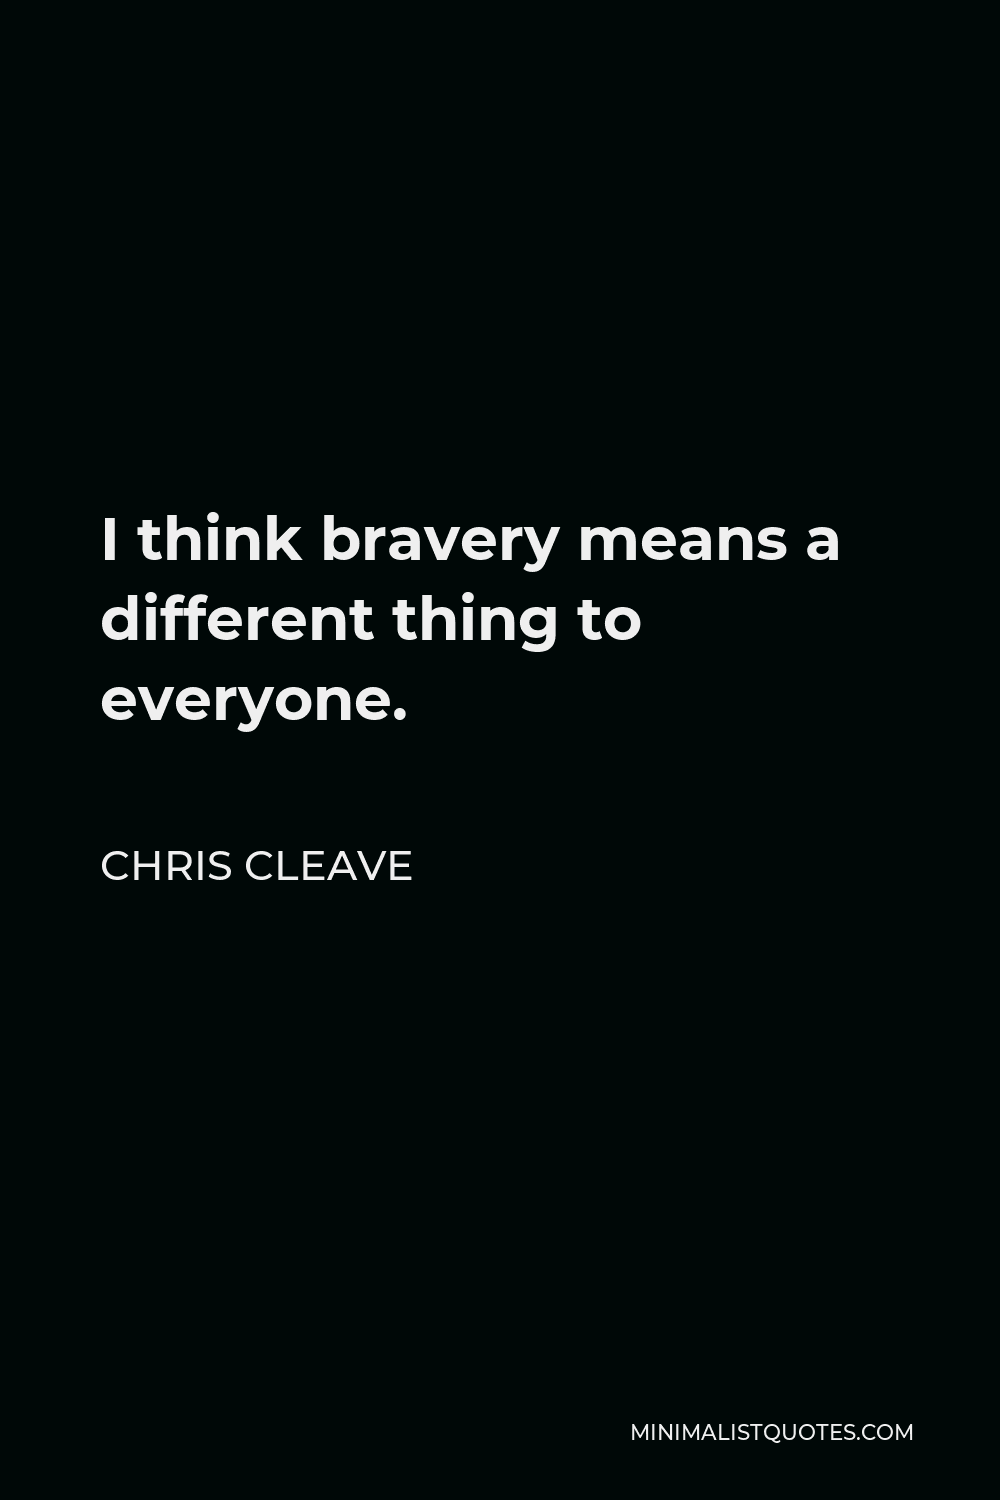 Chris Cleave Quote - I think bravery means a different thing to everyone.